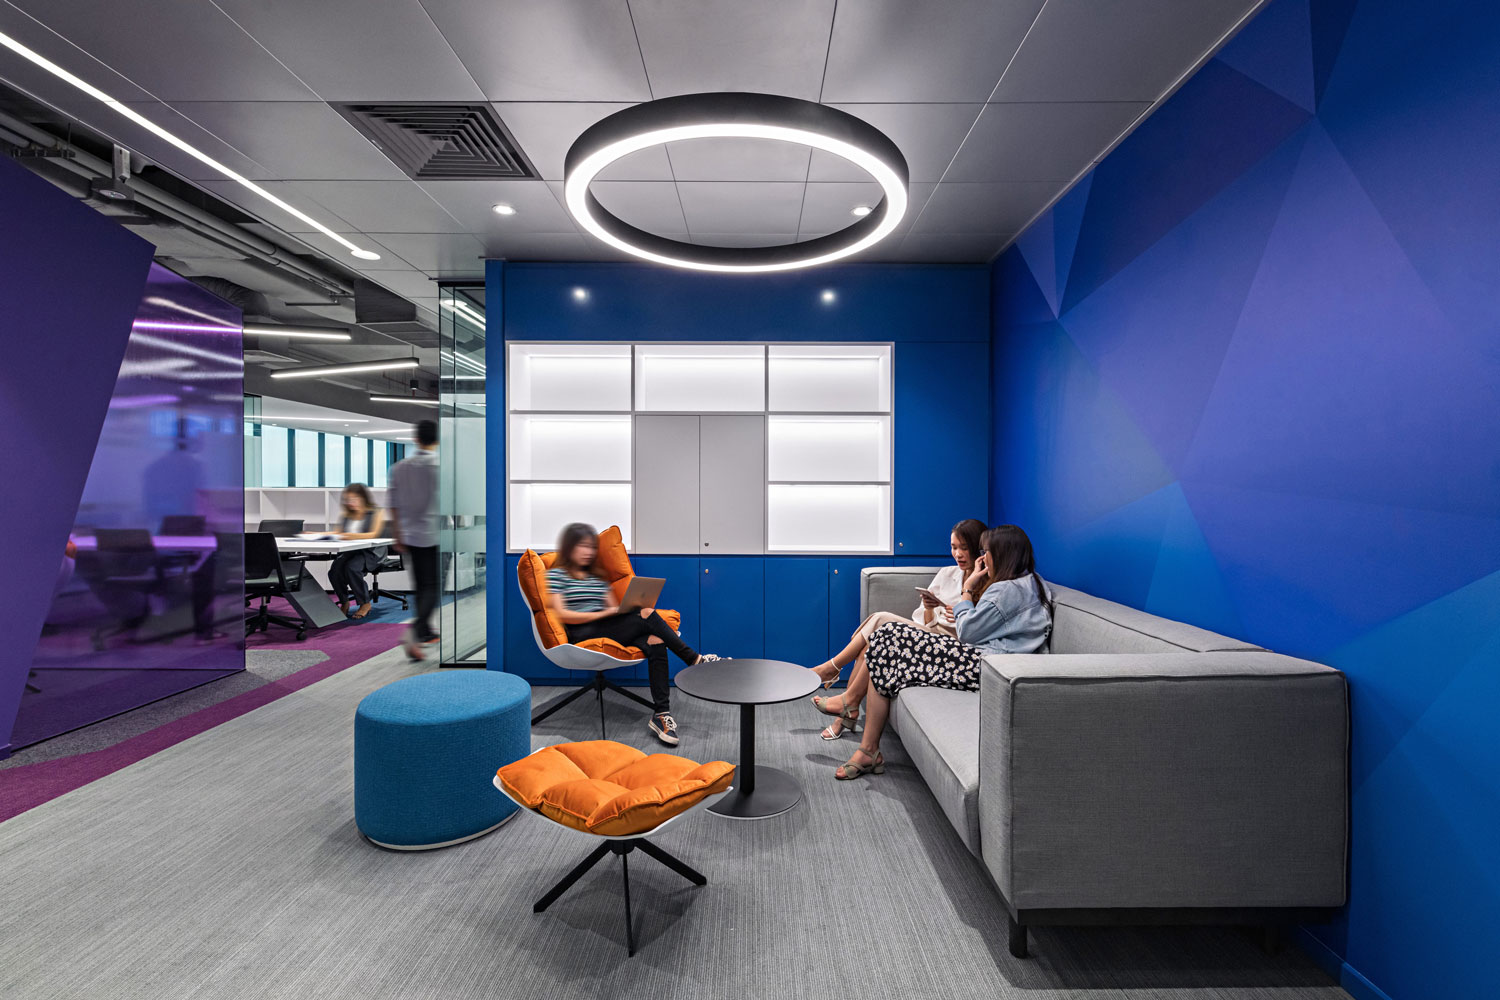 How to design workplaces that enhance productivity?